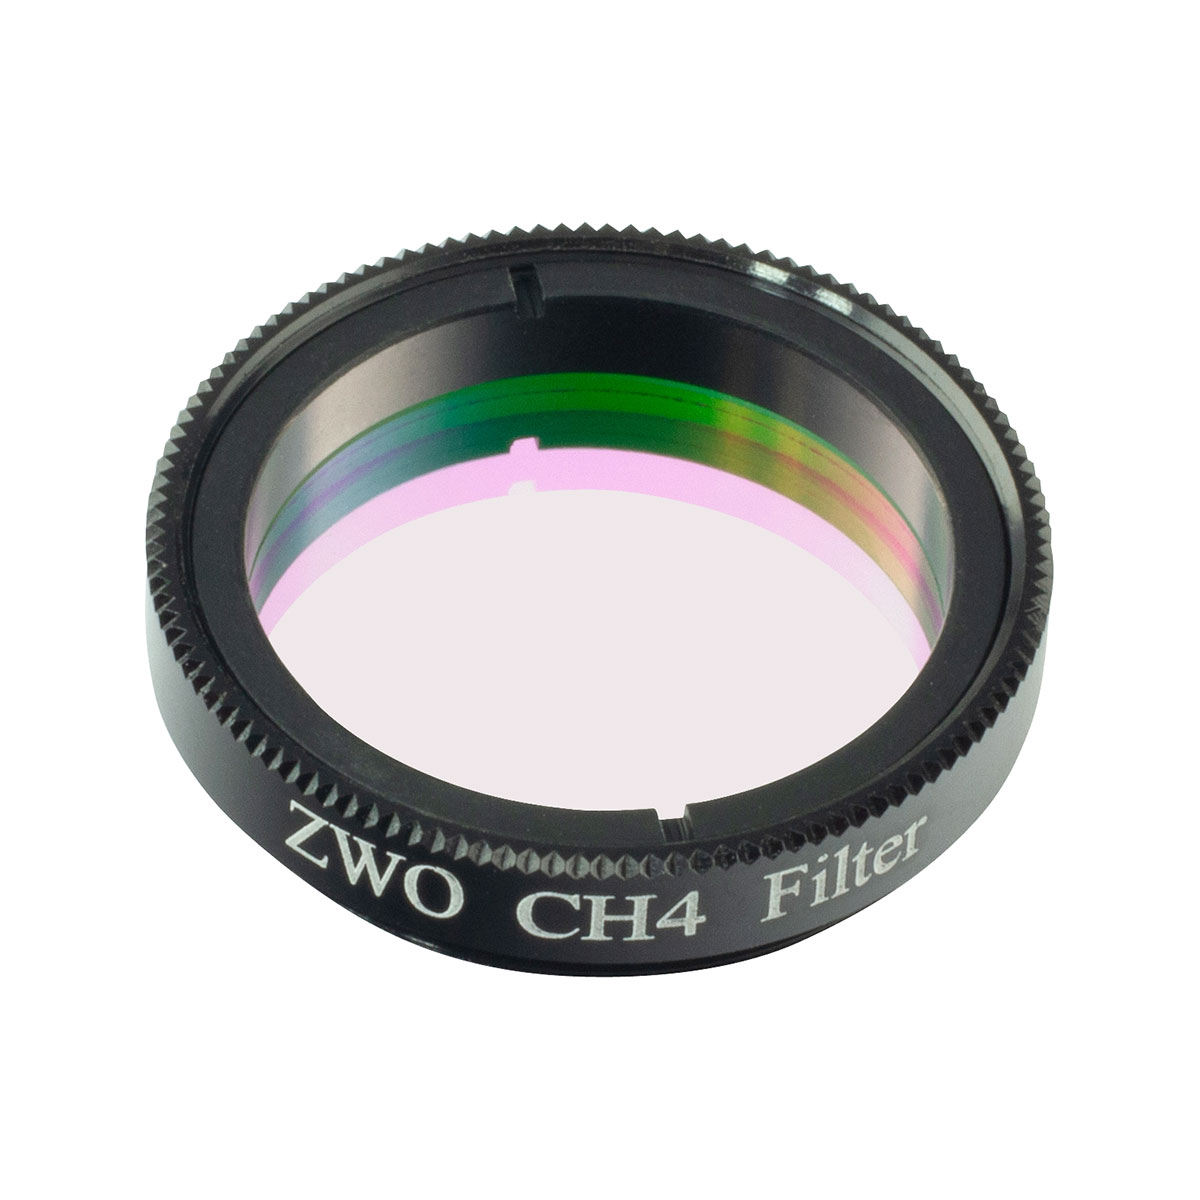 ZWO 1.25″ 20nm CH4 Filter